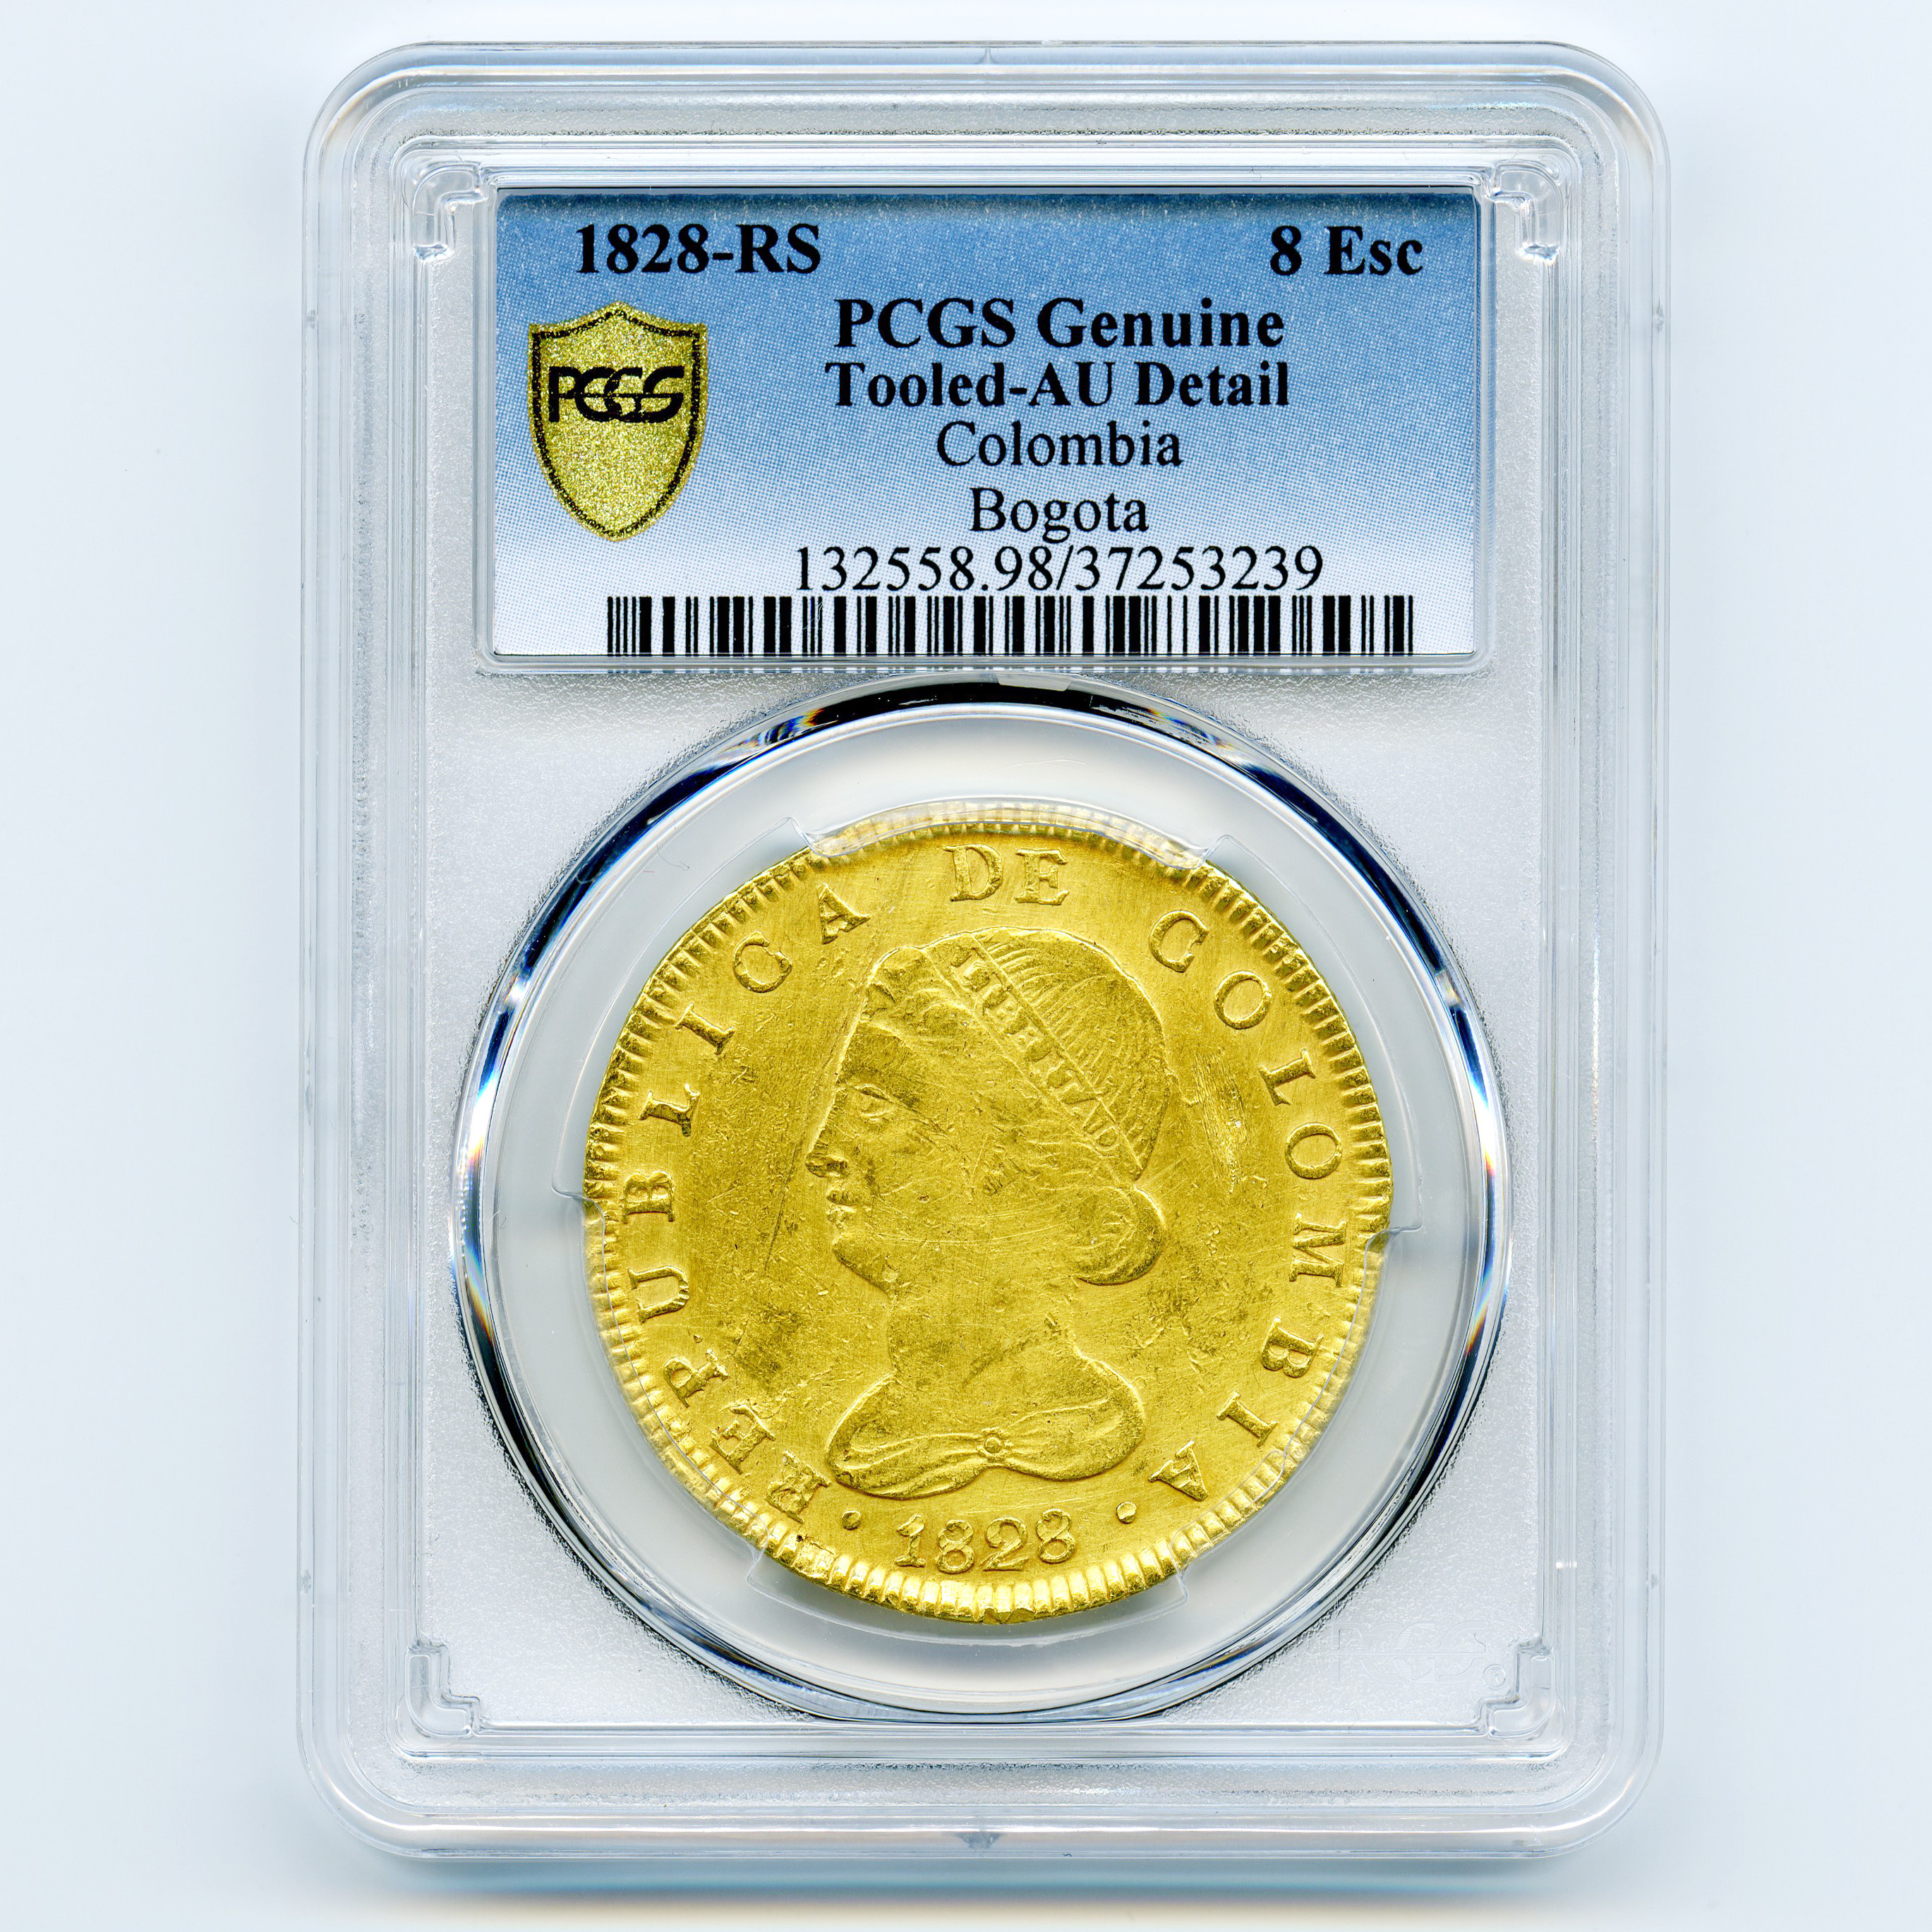 Colombie - 8 Escudos - 1828 RS avers